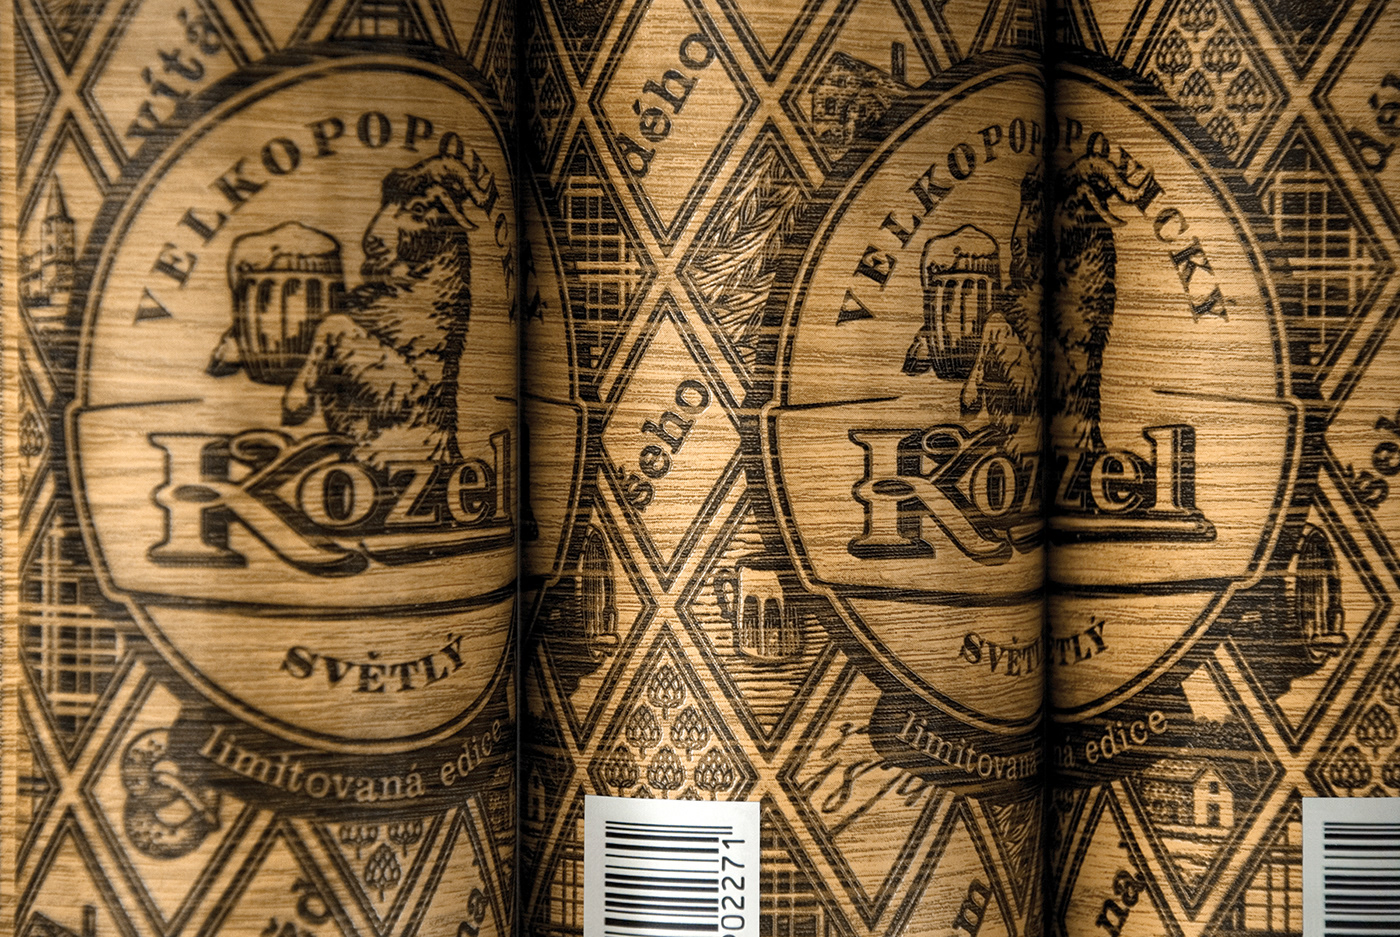 beer can Czech brand pattern limited edition value tradition mastership craft brewer brewery Collection gift